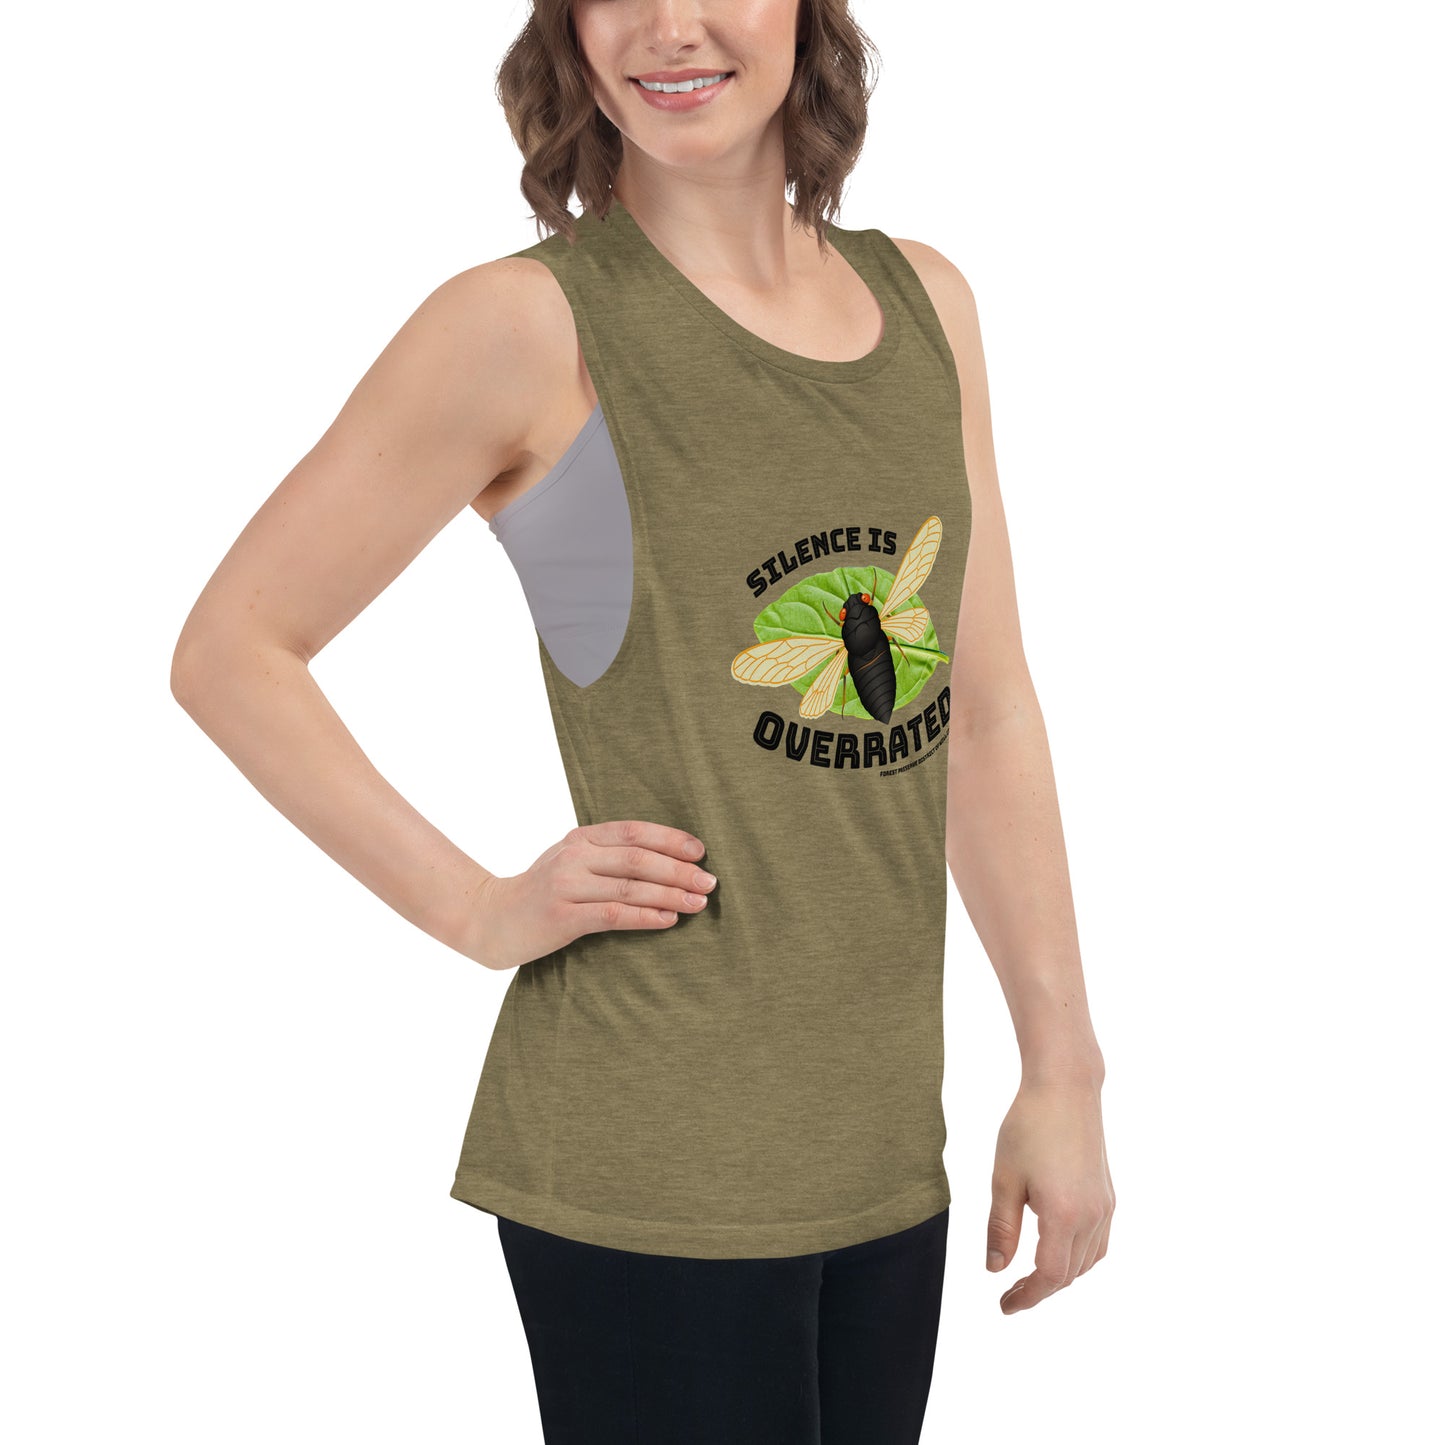 Silence is overrated cicada women's muscle tank